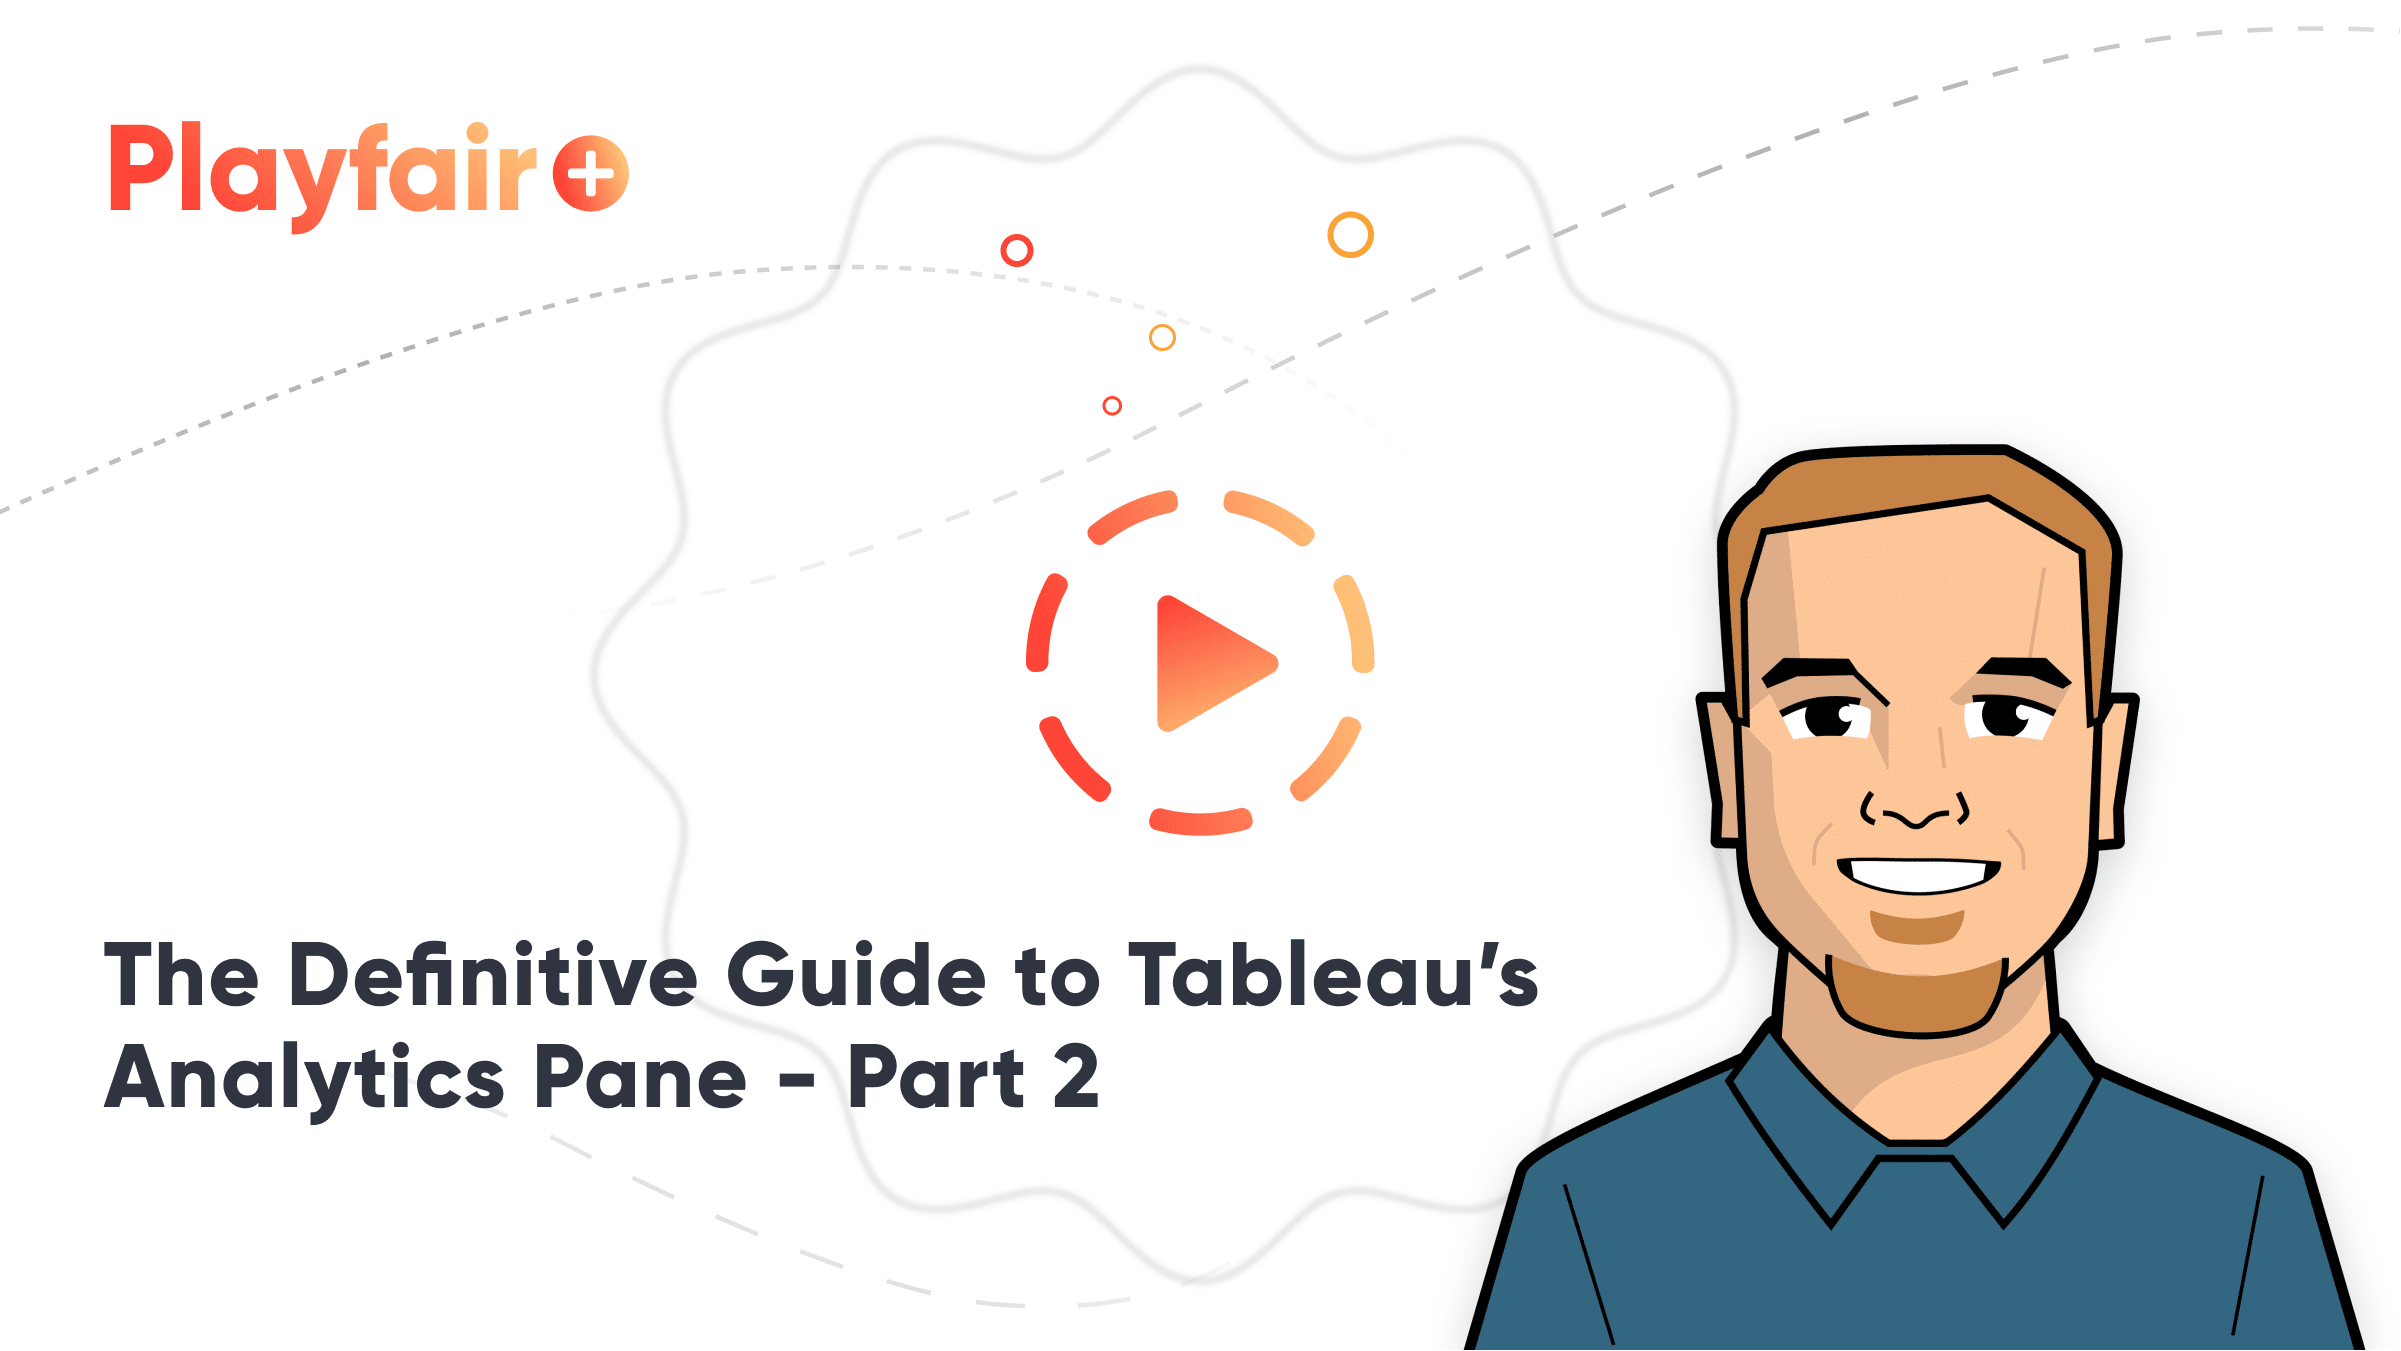 the definitive guide to tableau's analytics pane part 2